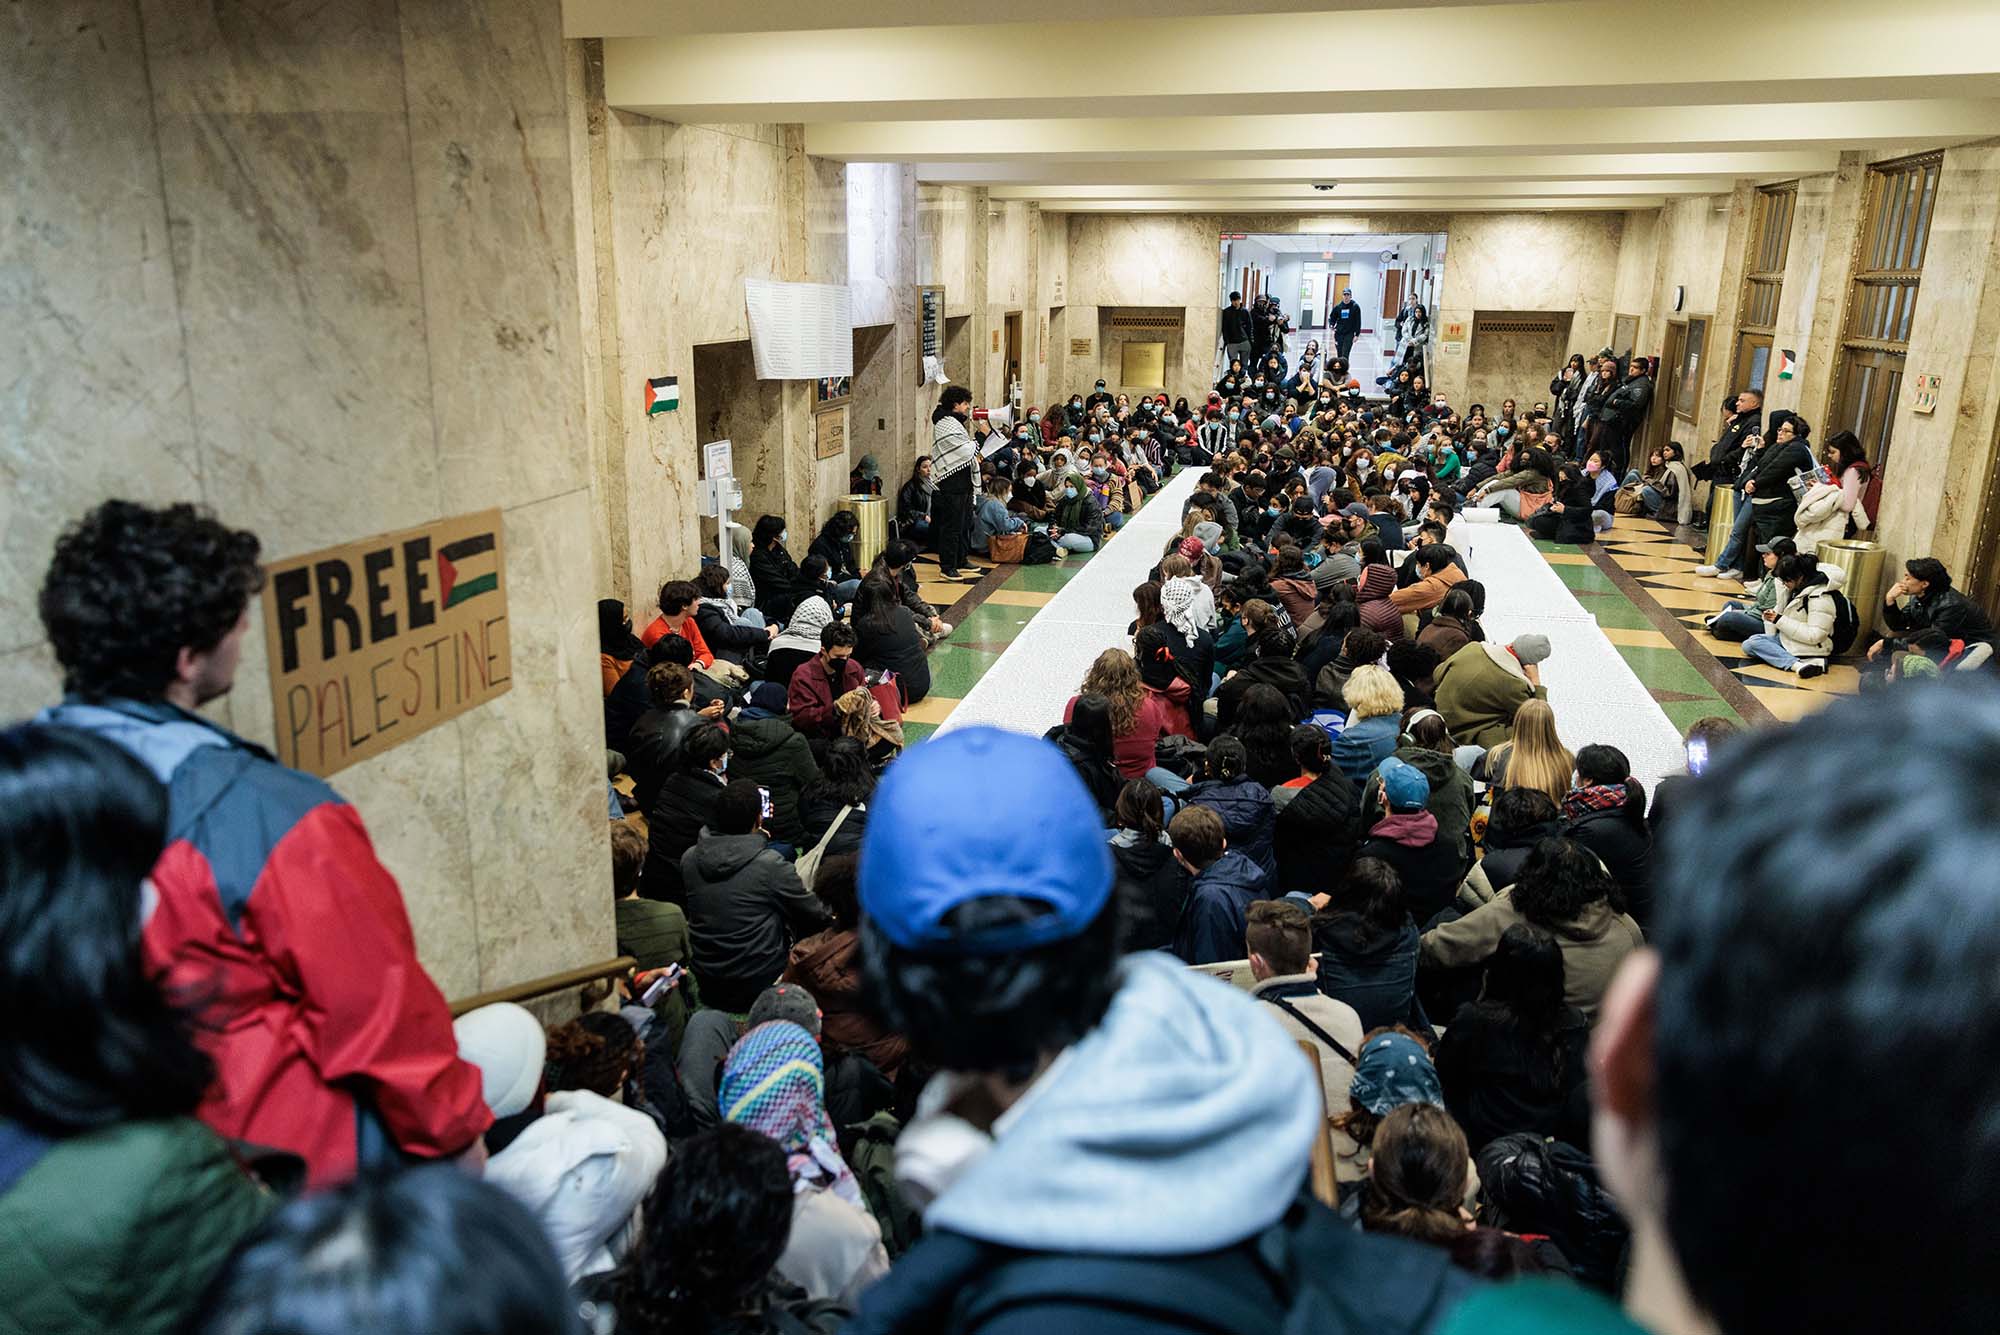 Photo: A large crowd of students sit in a large Performance Center entrance hall in silence. some are masked and some now. In the foreground to the left, a sign posted to a wall reads "Free Palestine". Two large rows of scrolls can be seen in the center of the crowd.